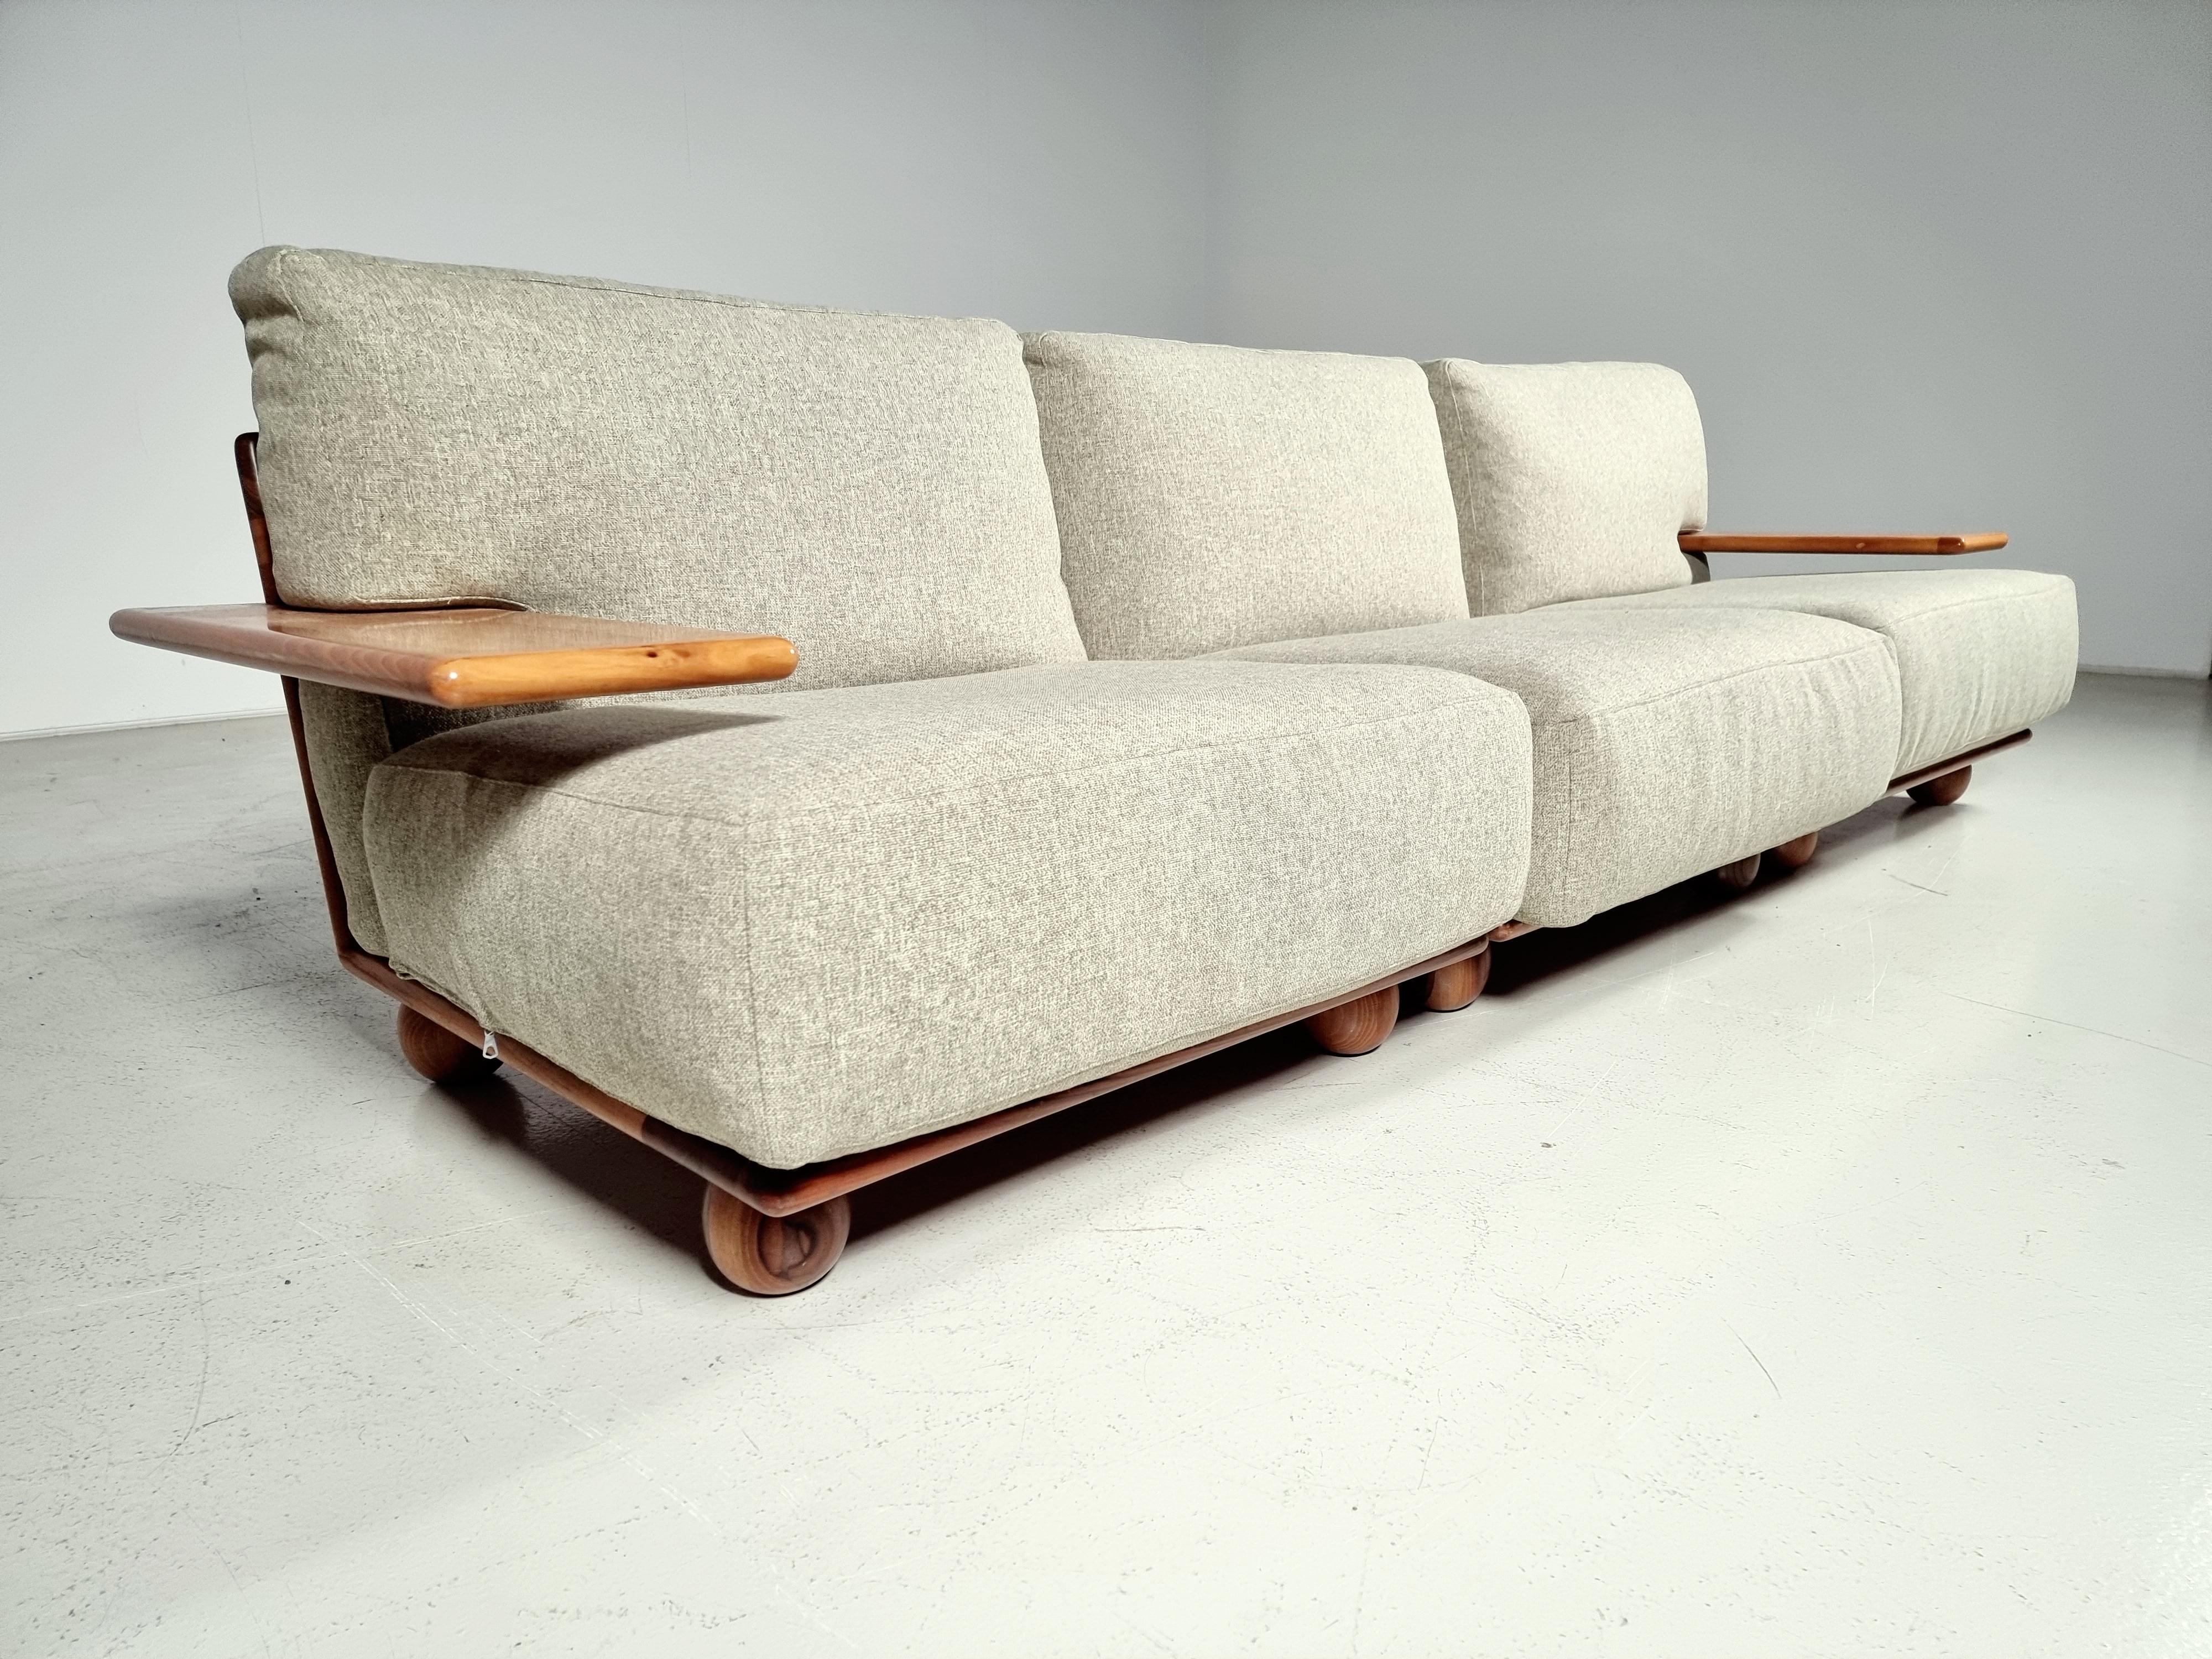 Fantastic high-quality modular sofa designed by Mario Bellini for Cassina, Italy 1971. This set was called Pianura and has a solid walnut wood frame and solid walnut legs. The wood makes the design really stand out. The cushions are reupholstered in